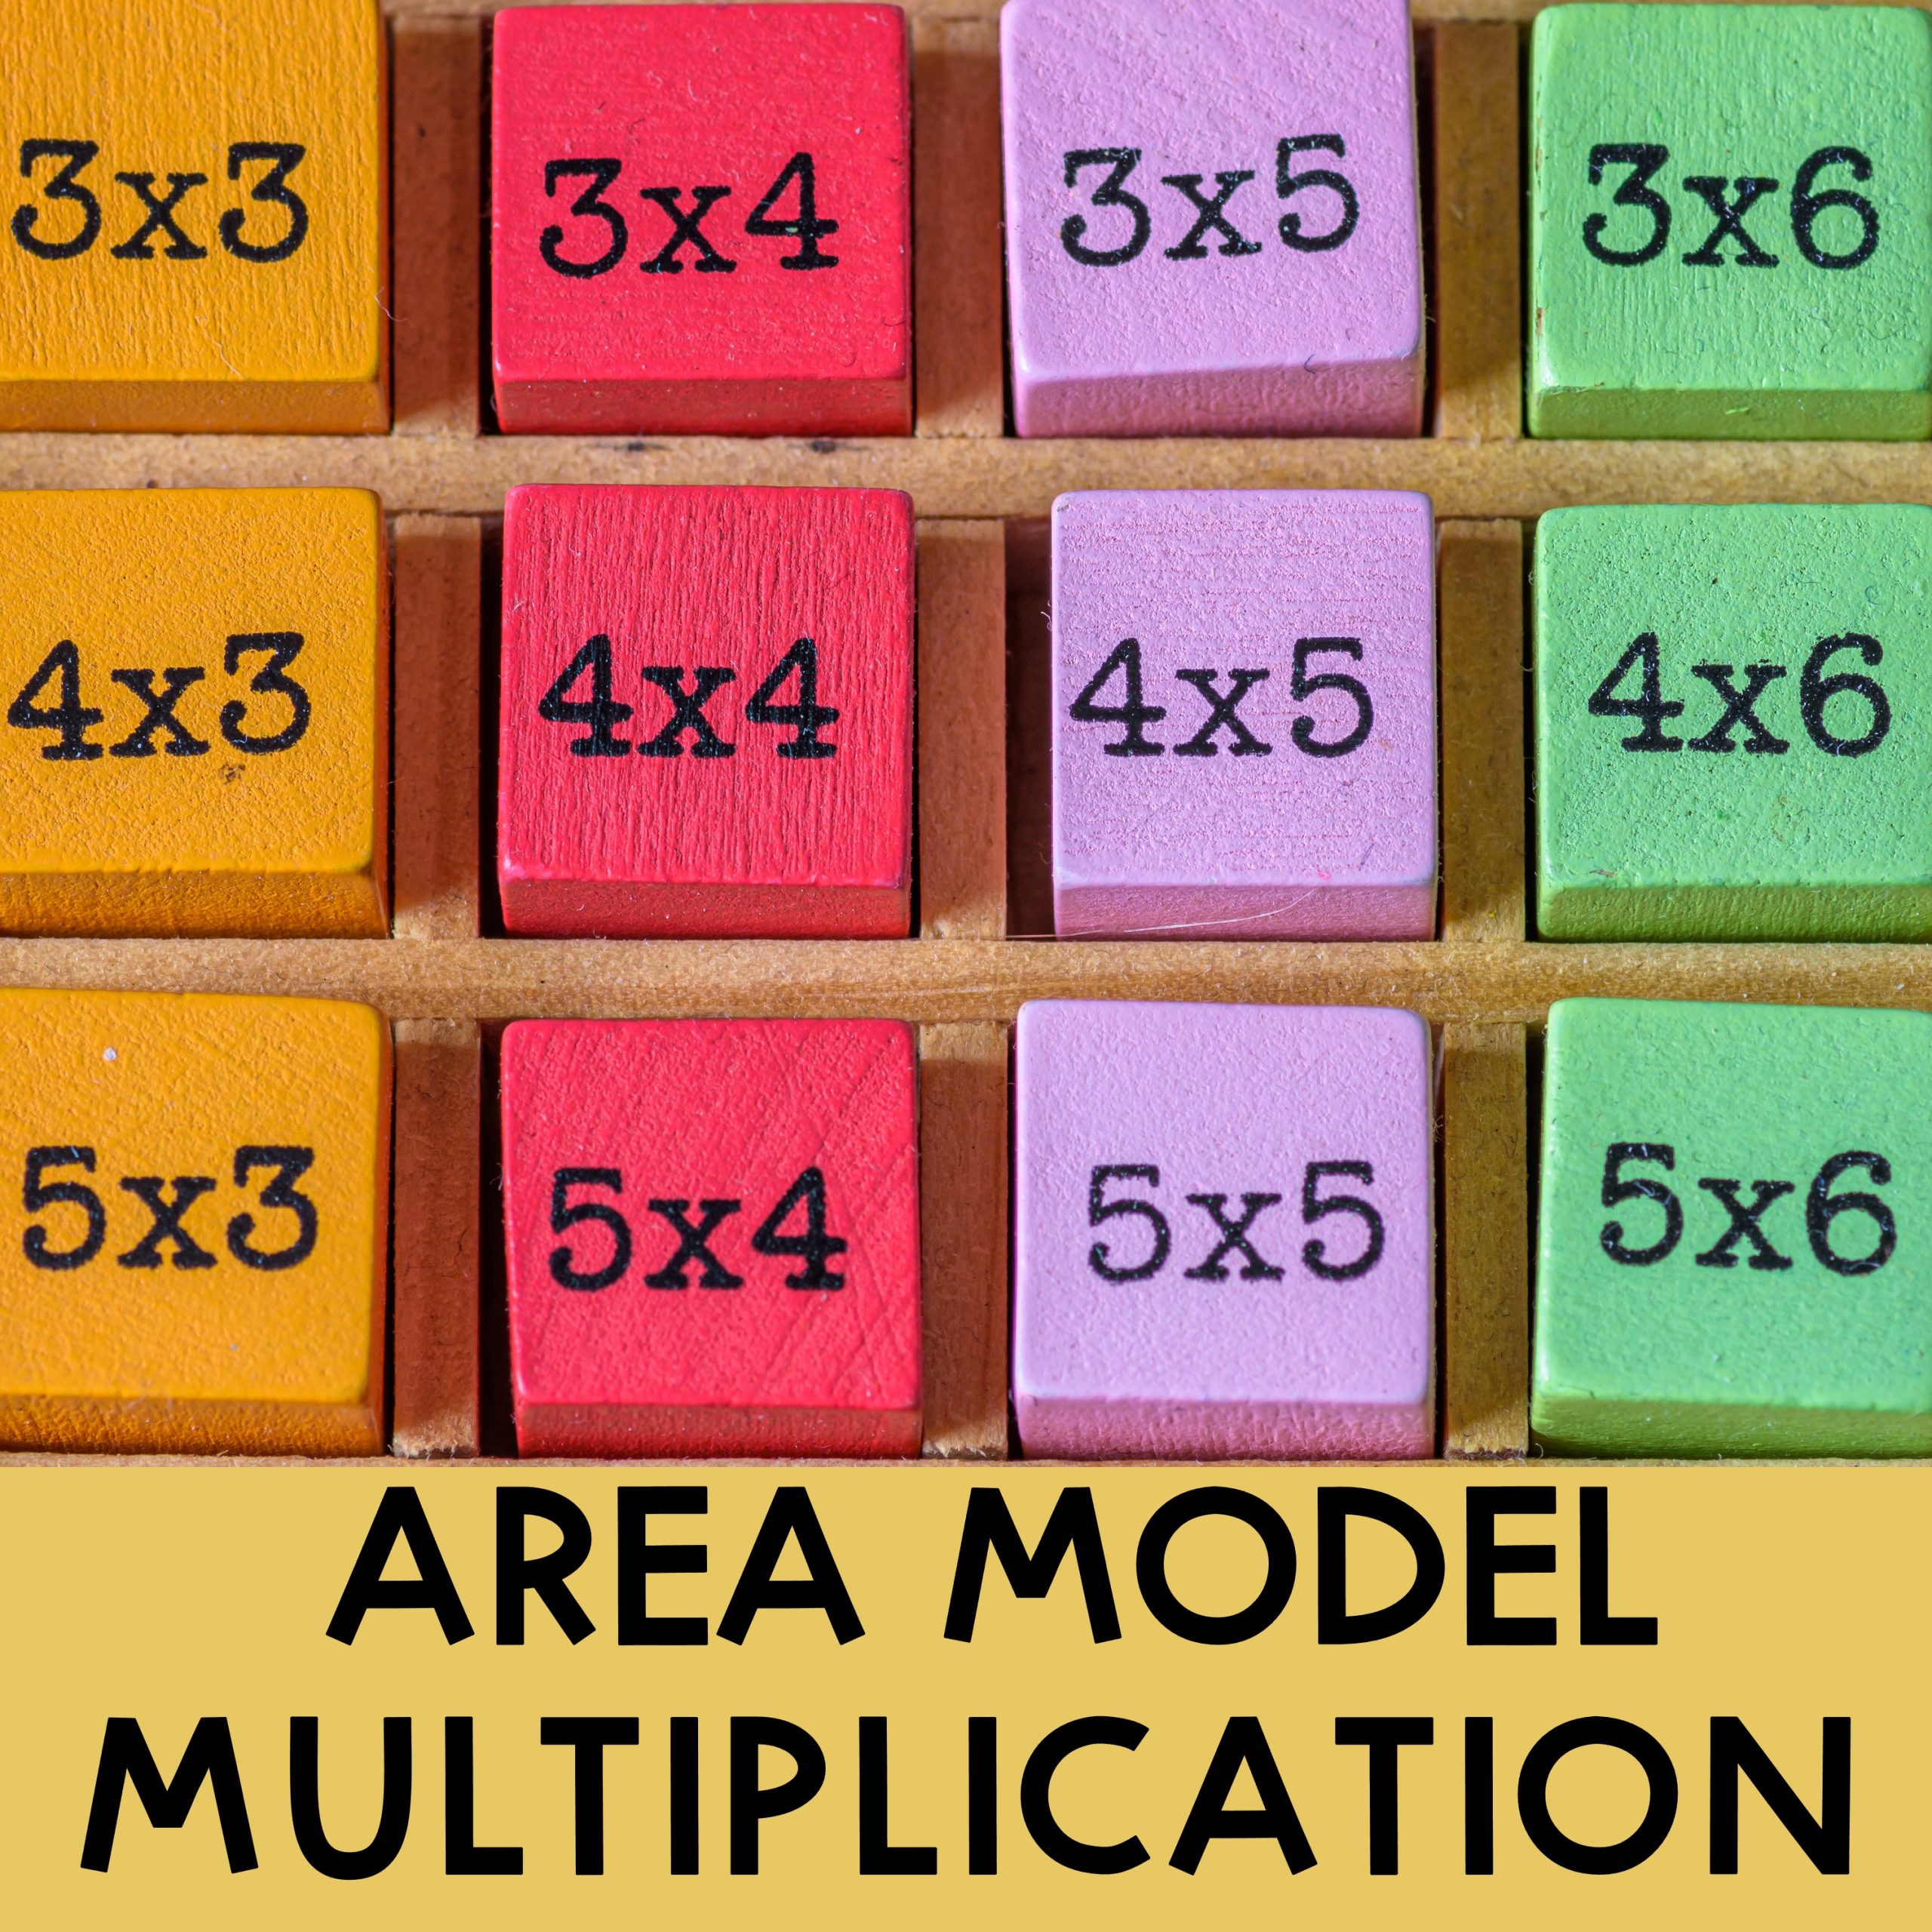 Area Model Multiplication Guide and Examples